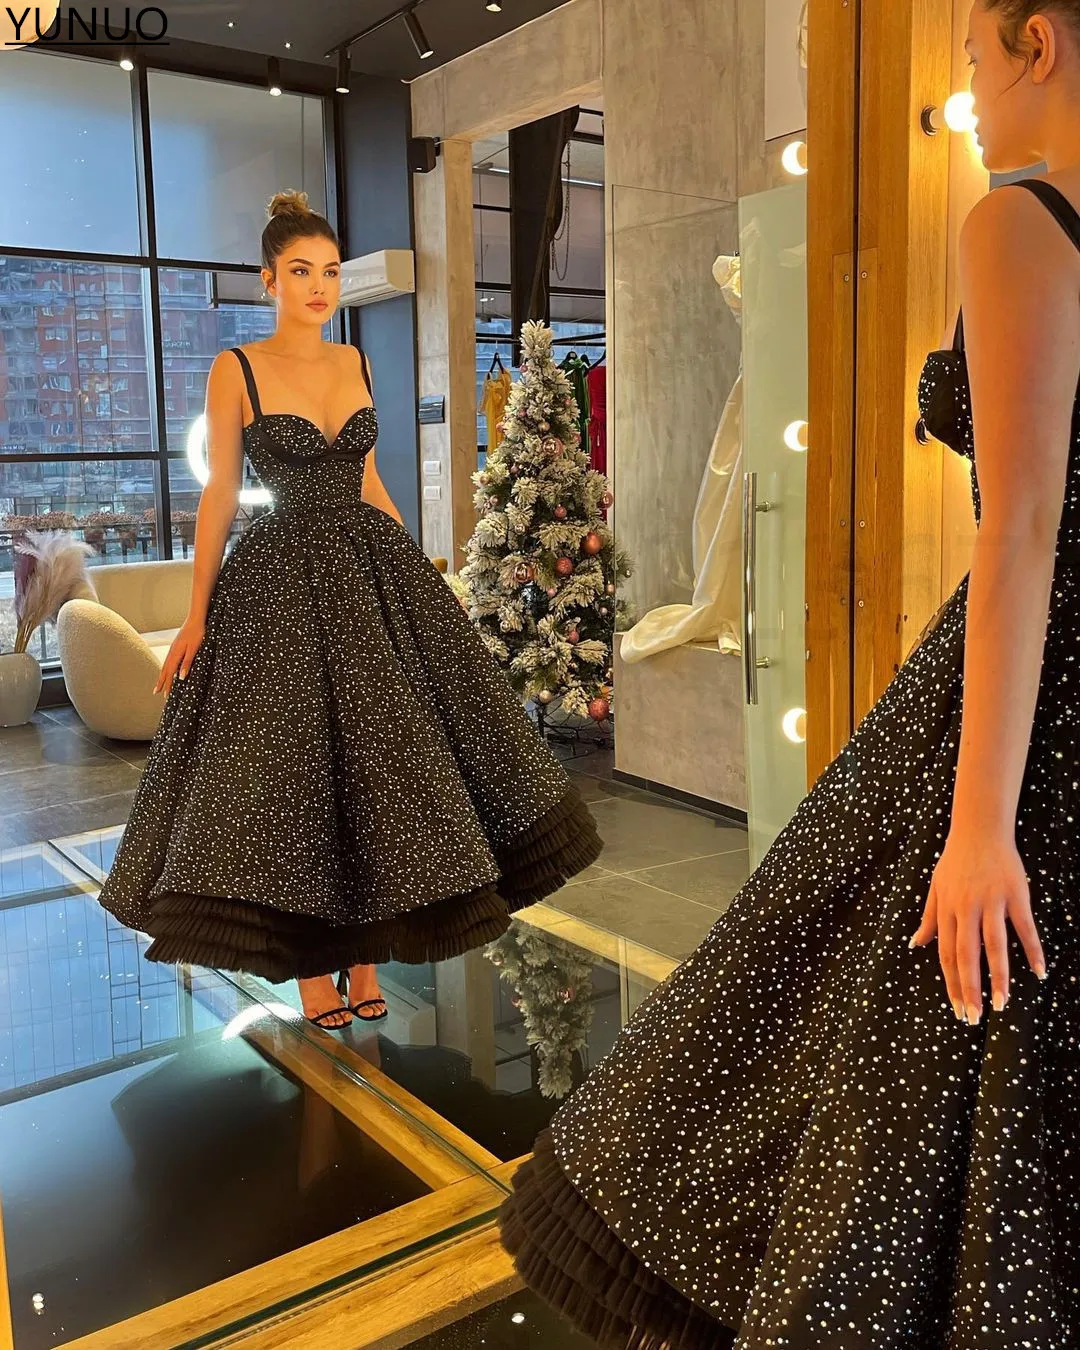 YUNUO 2022 Vintage Black Short Prom Dresses Sweetheart Sleeveless Pearls Evening Ball Gowns Ankle Length Party Cocktail Dress windsor prom dresses